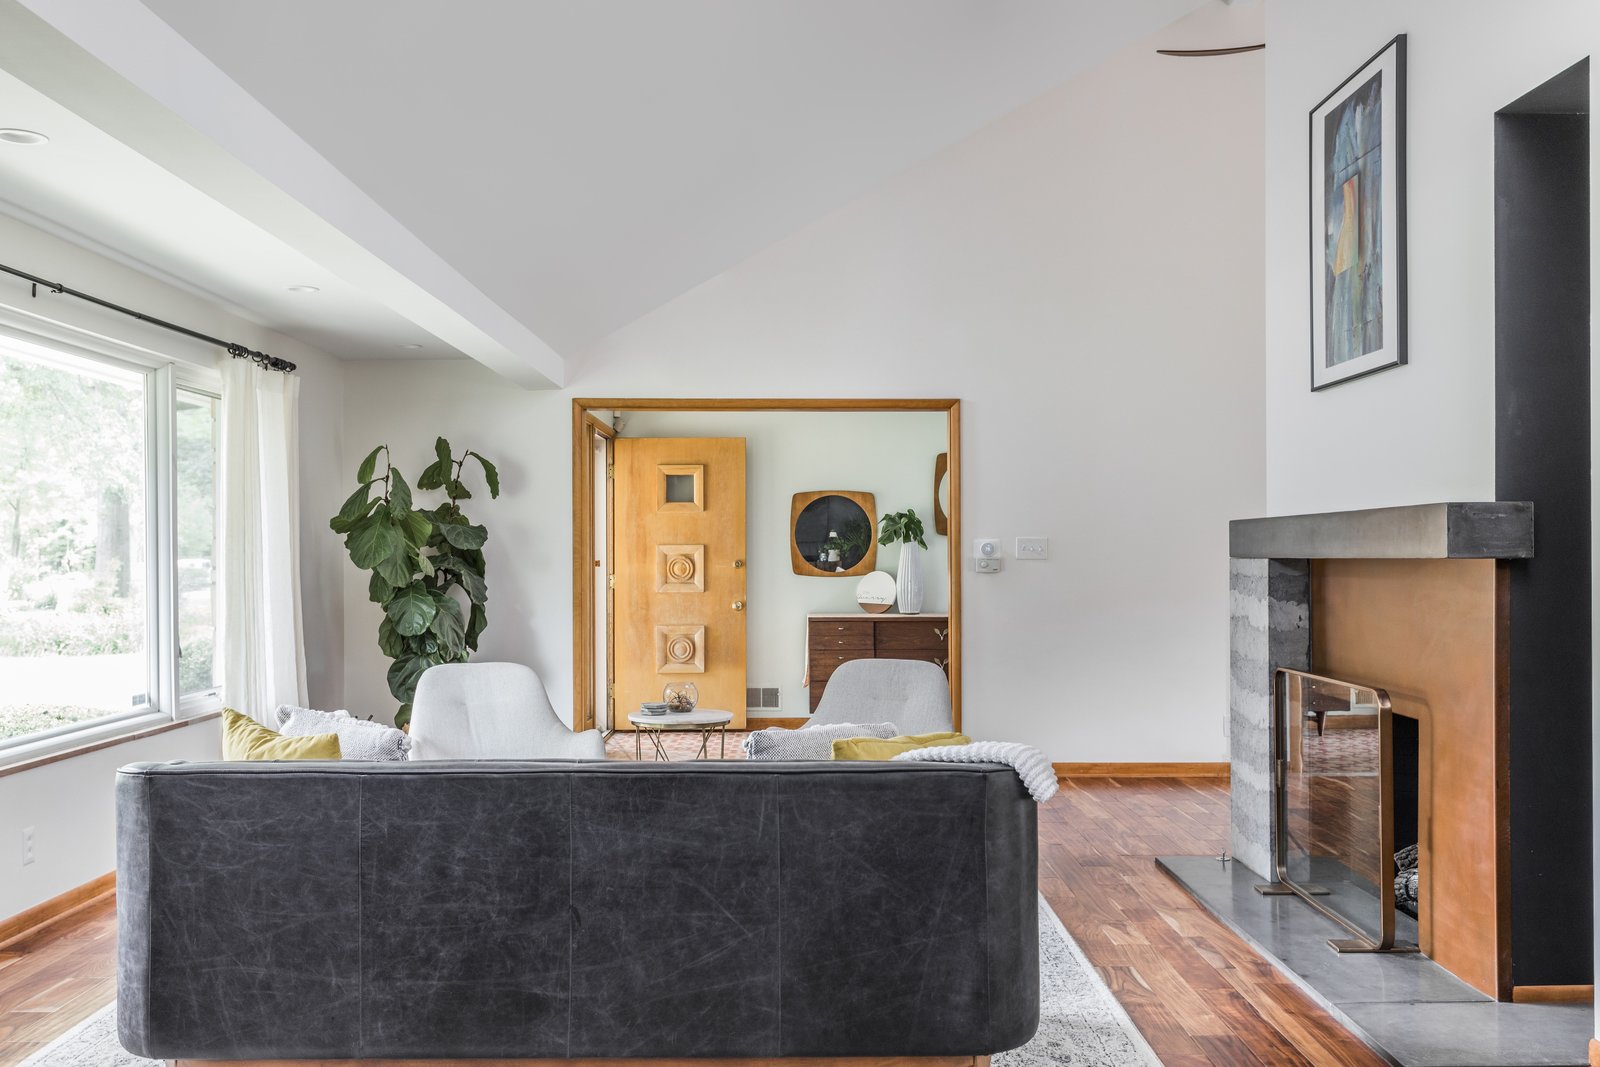 the-new-eight-foot-tall-chimney-though-the-cutout-was-never-a-part-of-their-original-plan-they-now-love-this-unique-feature-as-it-brings-ample-light-into-the-dining-room.jpg